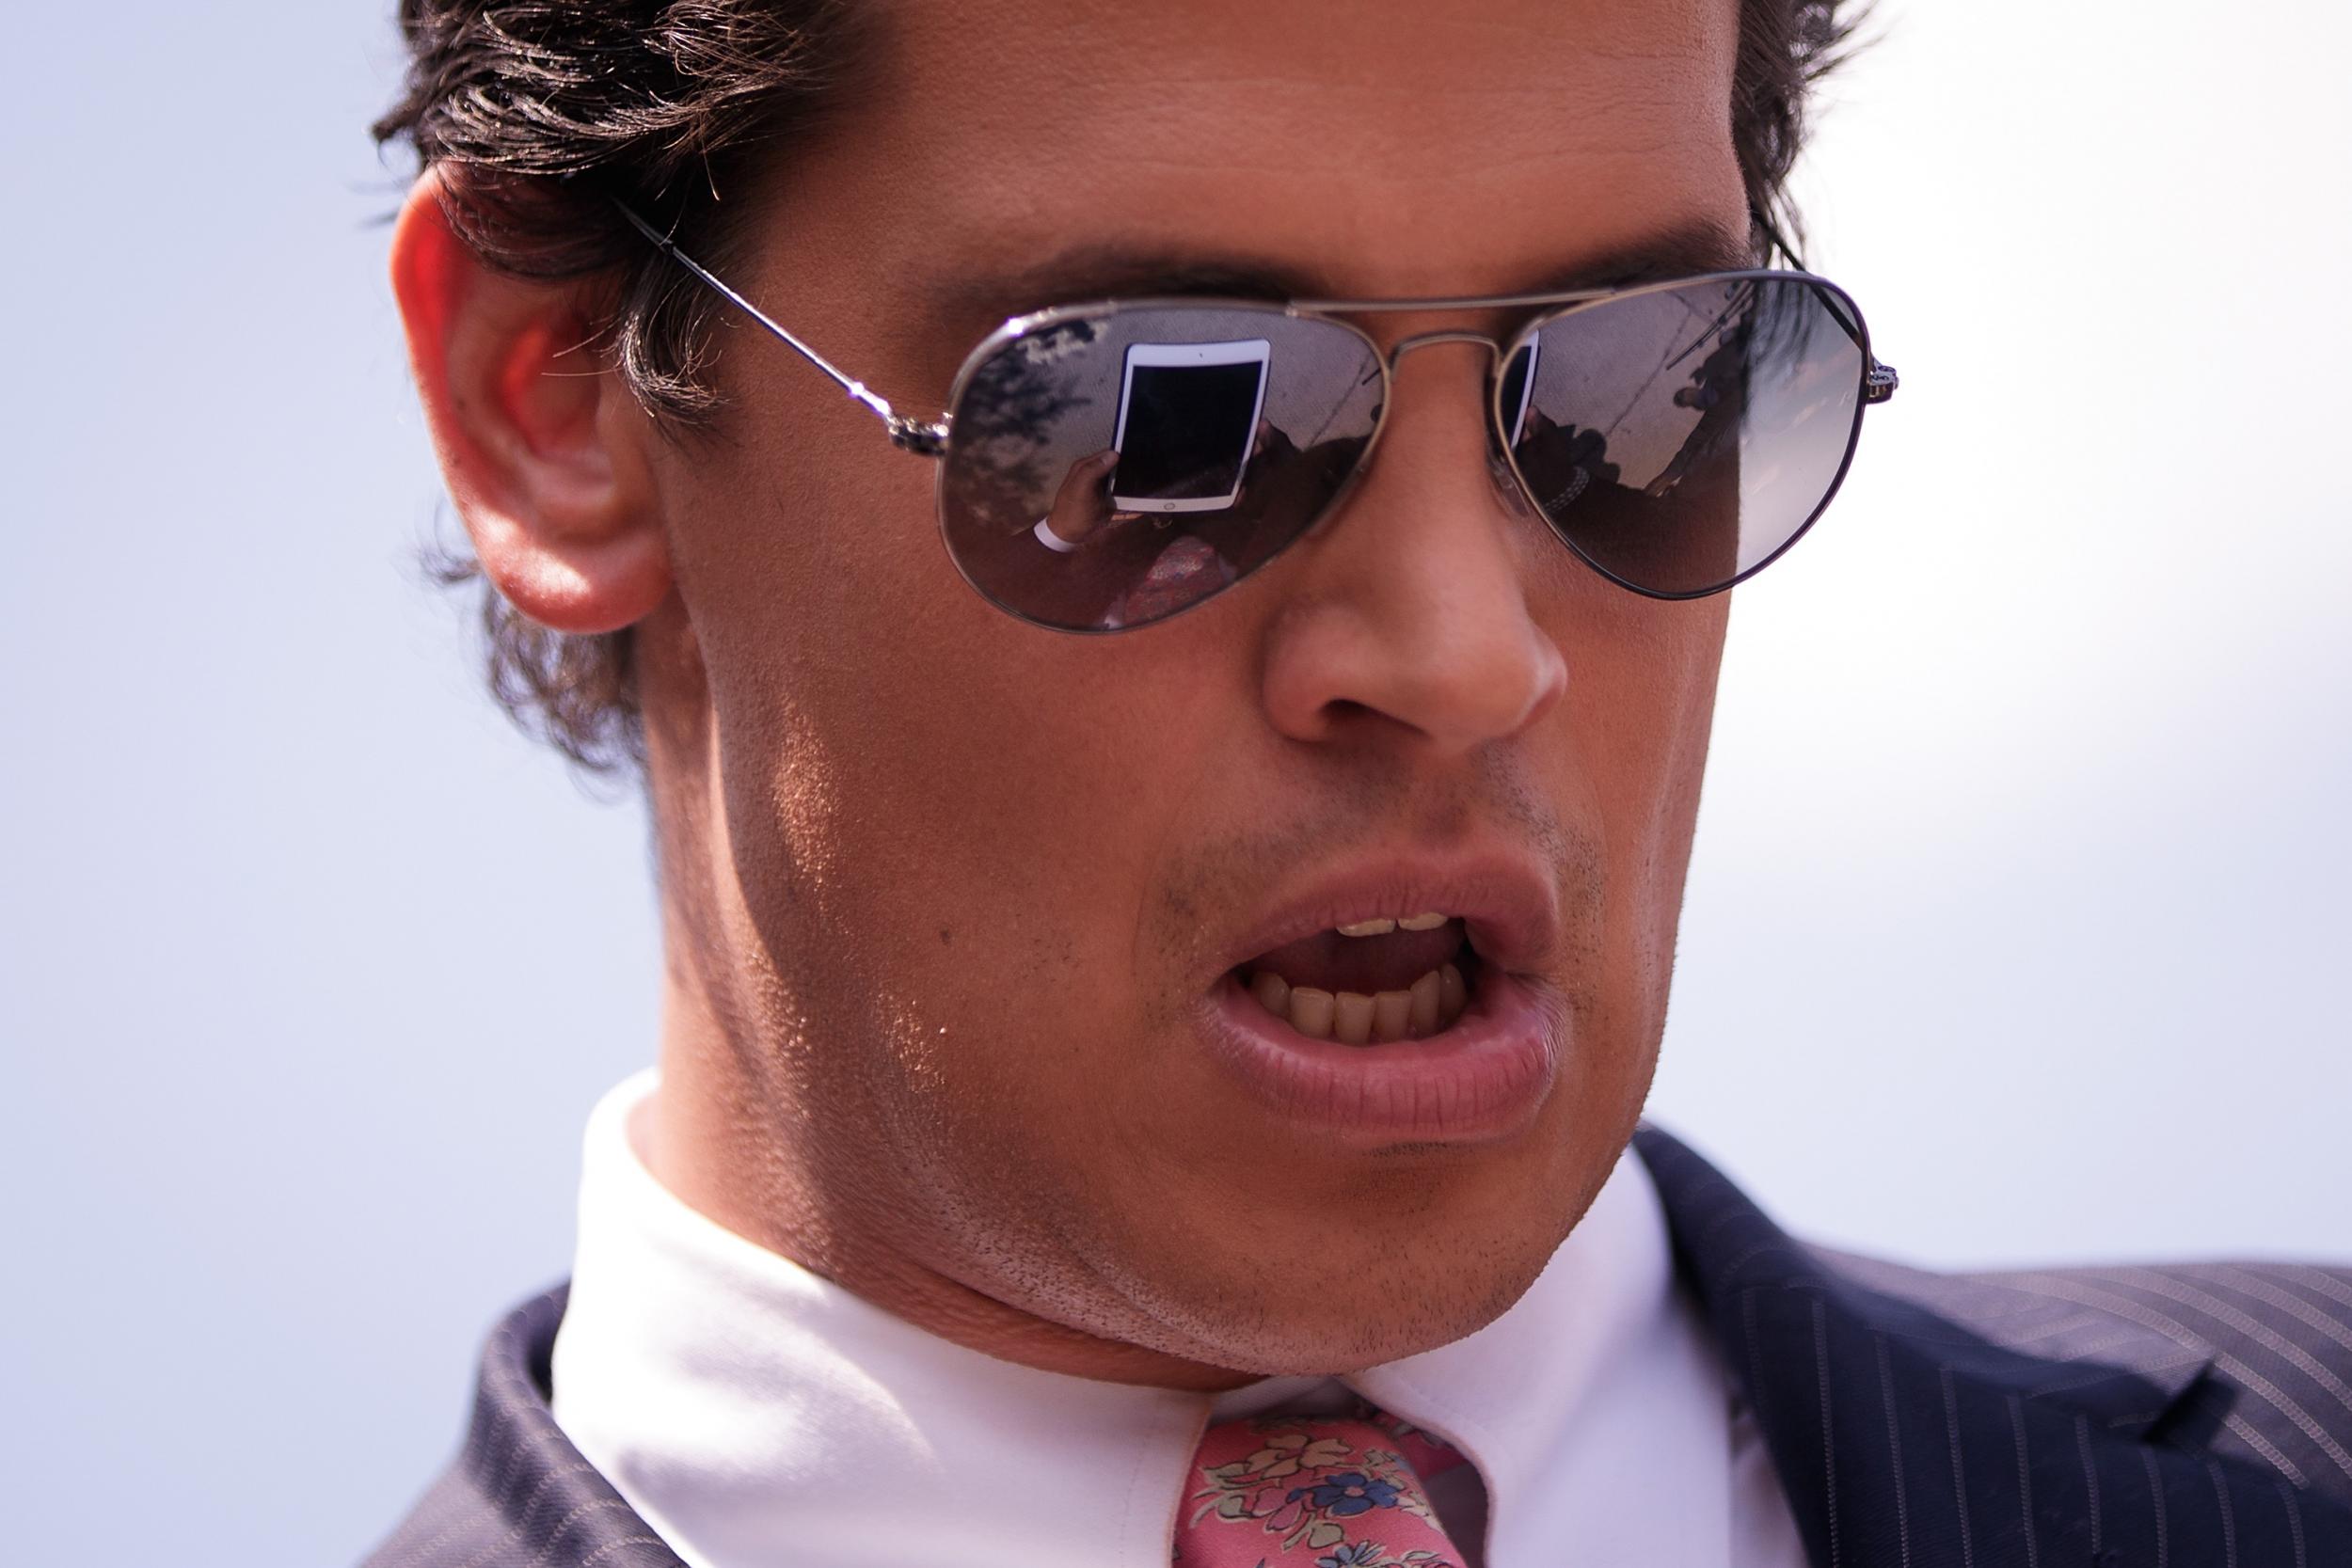 Yiannopoulos himself also expressed his anger at the news he had been prohibited from talking